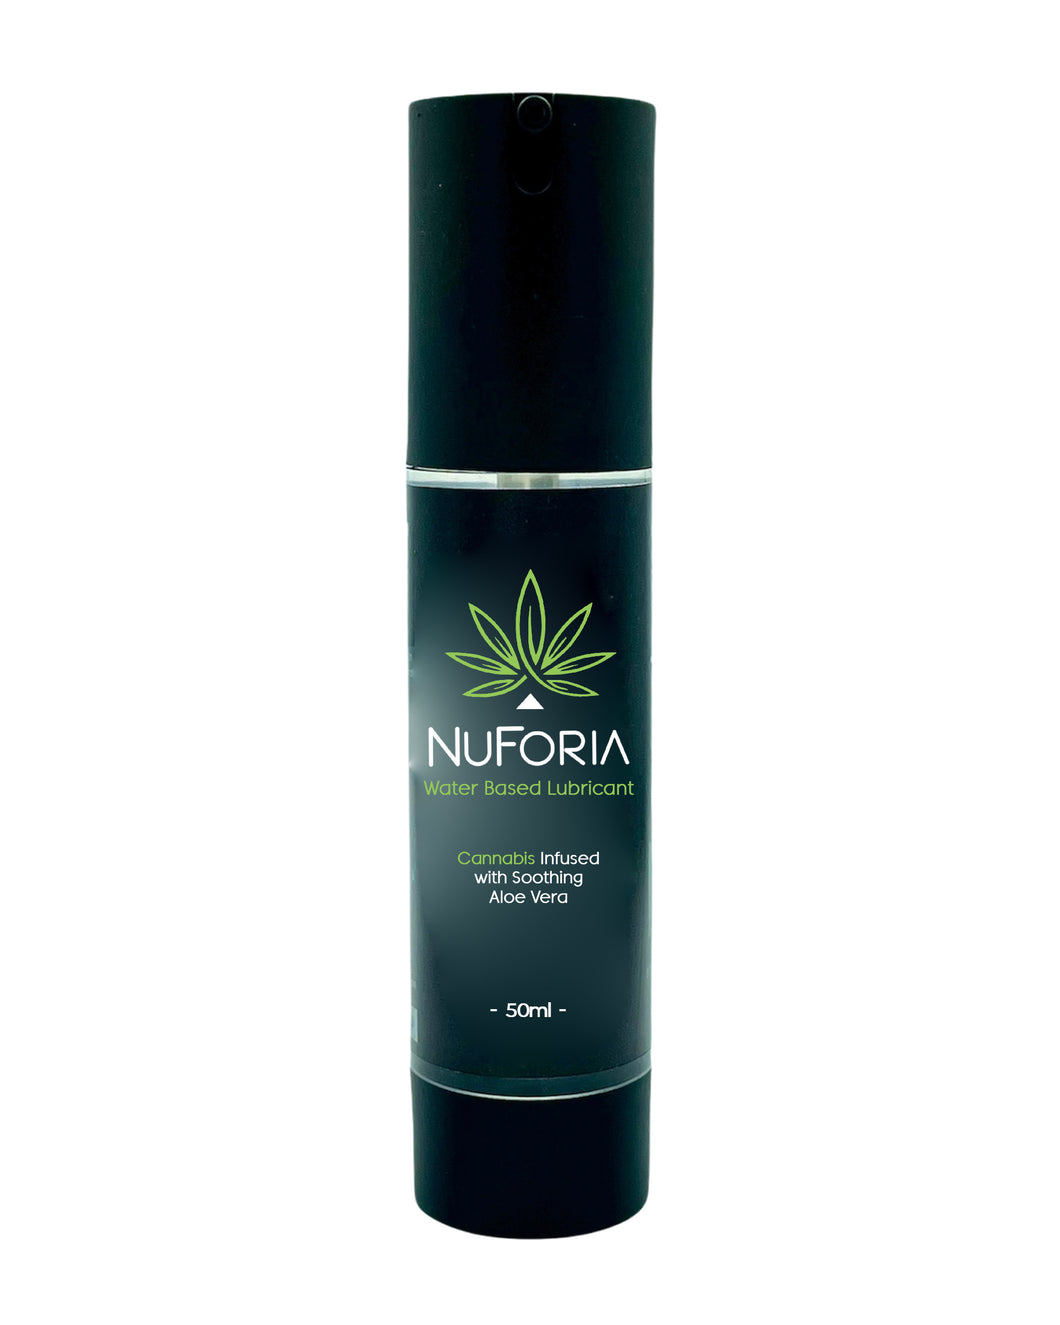 NuForia Water Based Lubricant Cannabis Infused with Soothing Aloe Vera 50ml